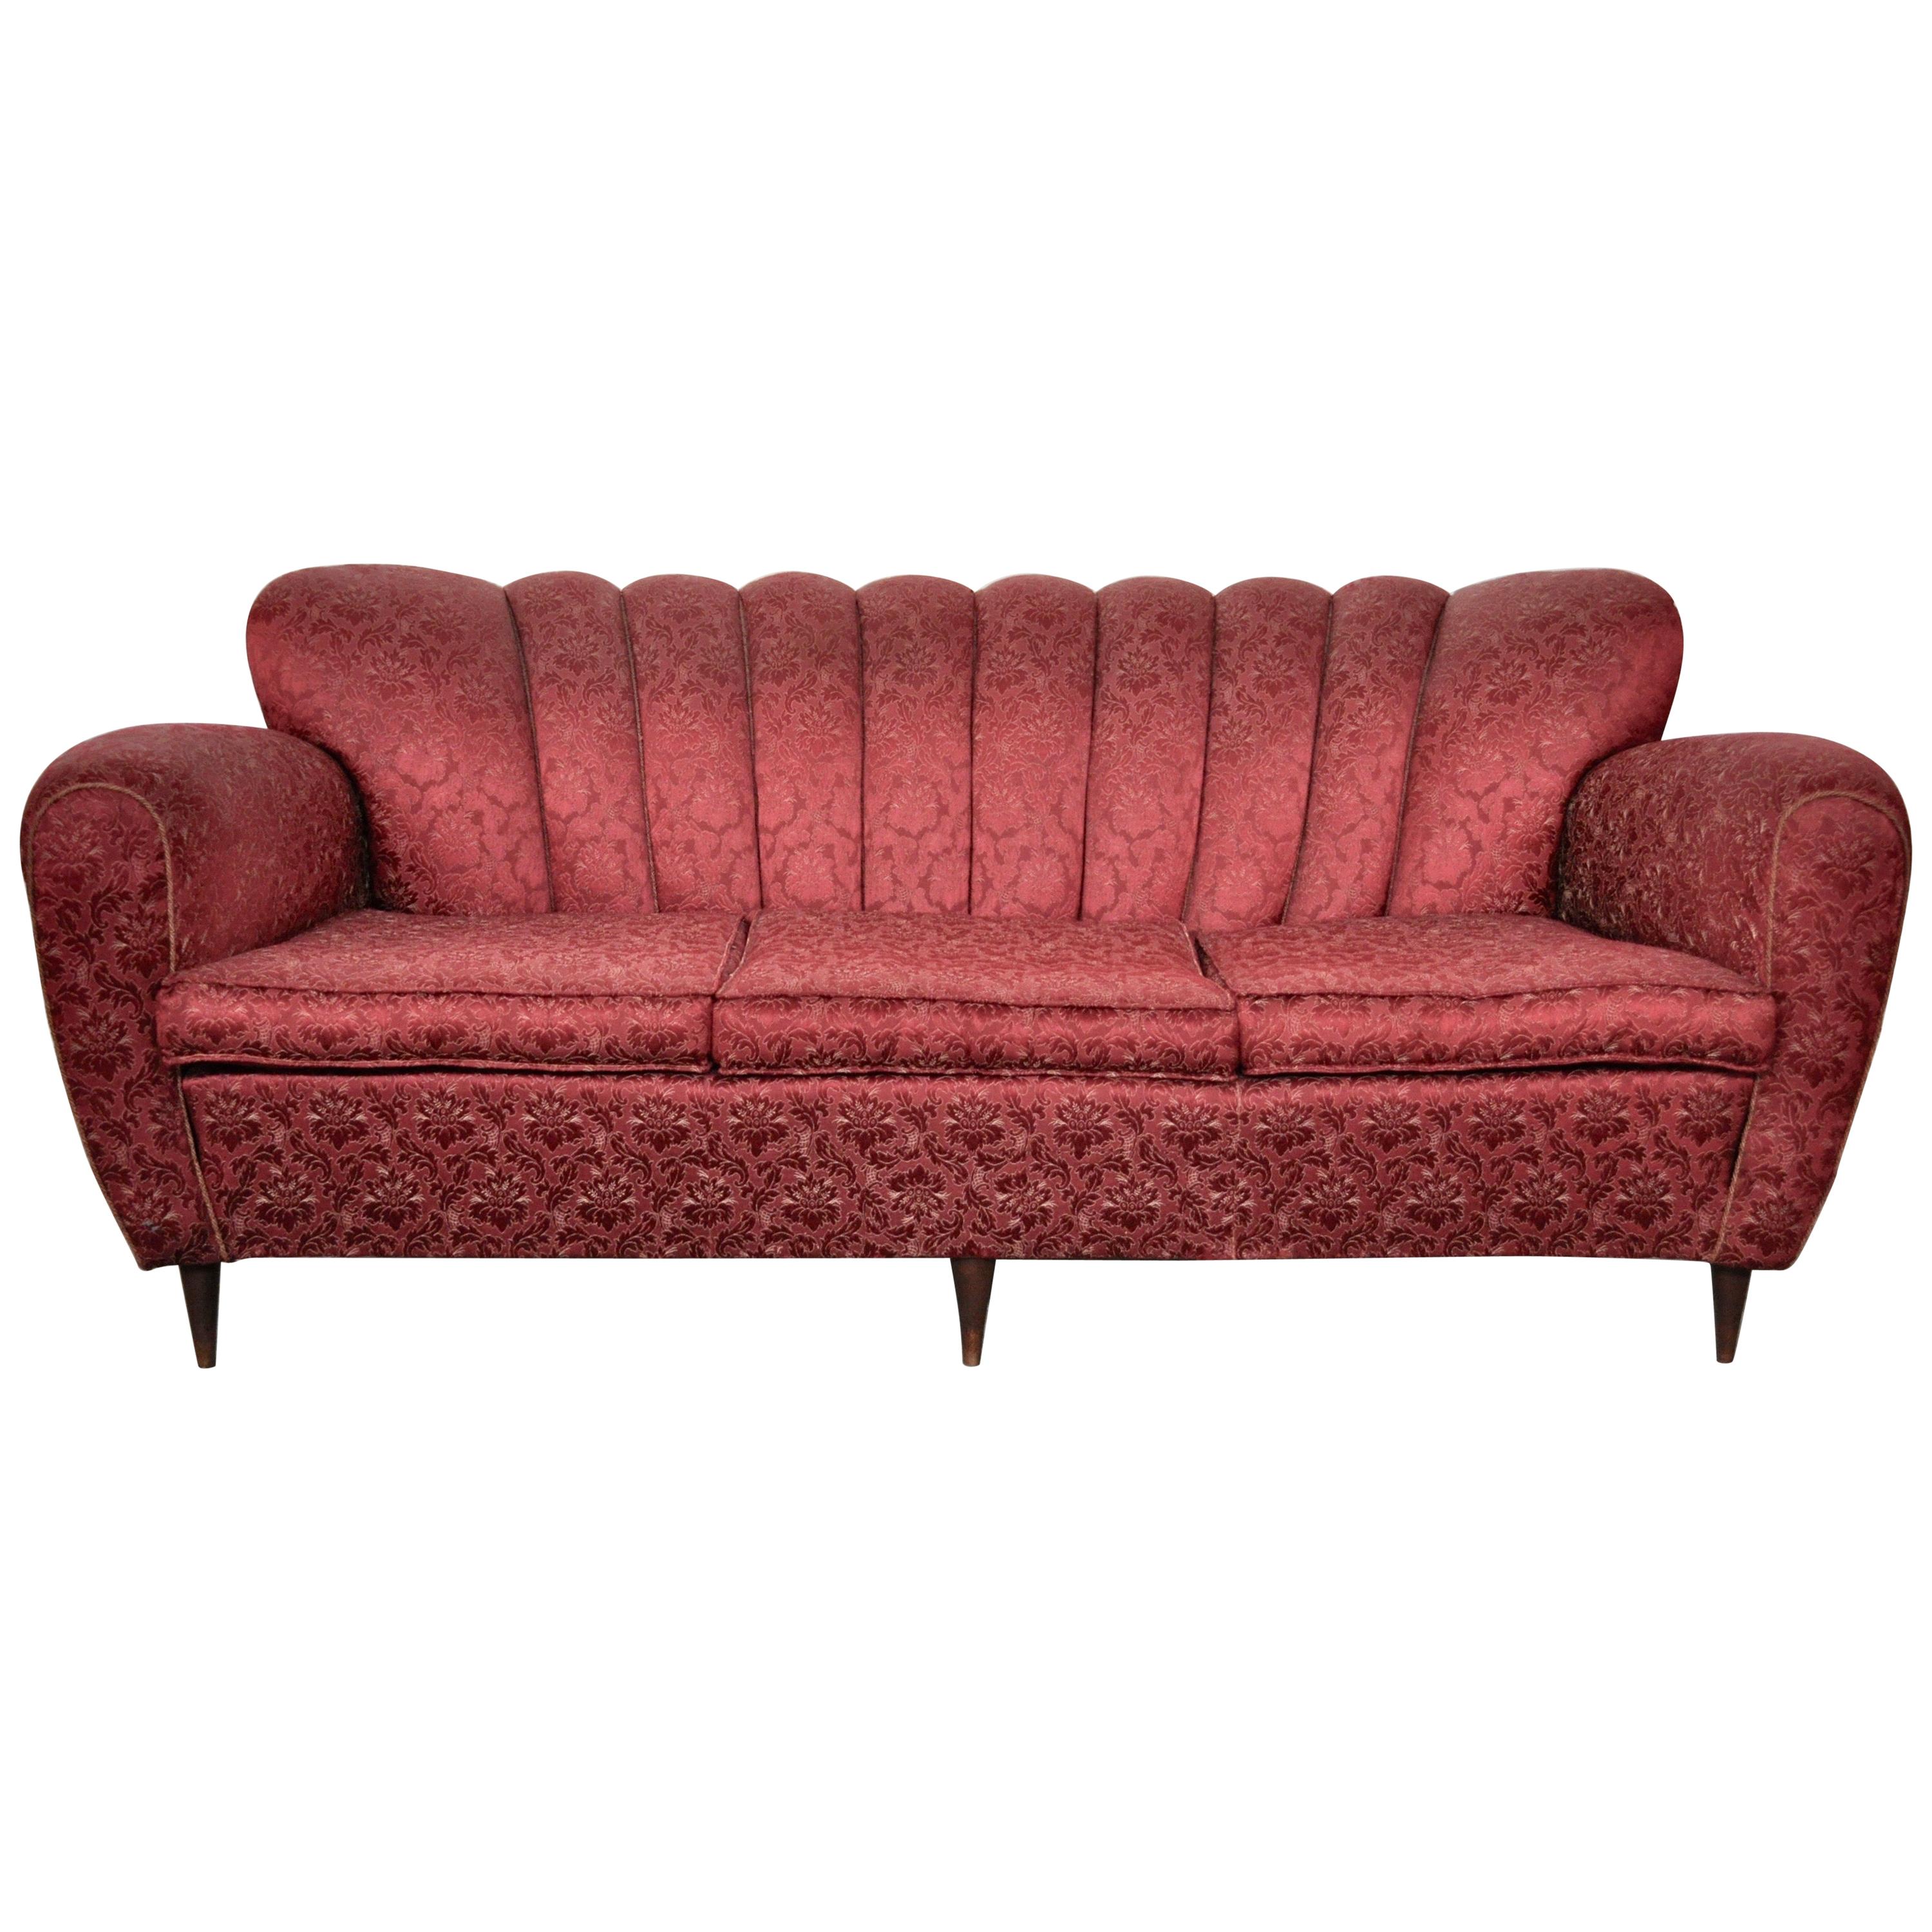 Three-Seat Sofa in Red Fabric, Gold Cord Details, by Paolo Buffa, Italy, 1950 For Sale